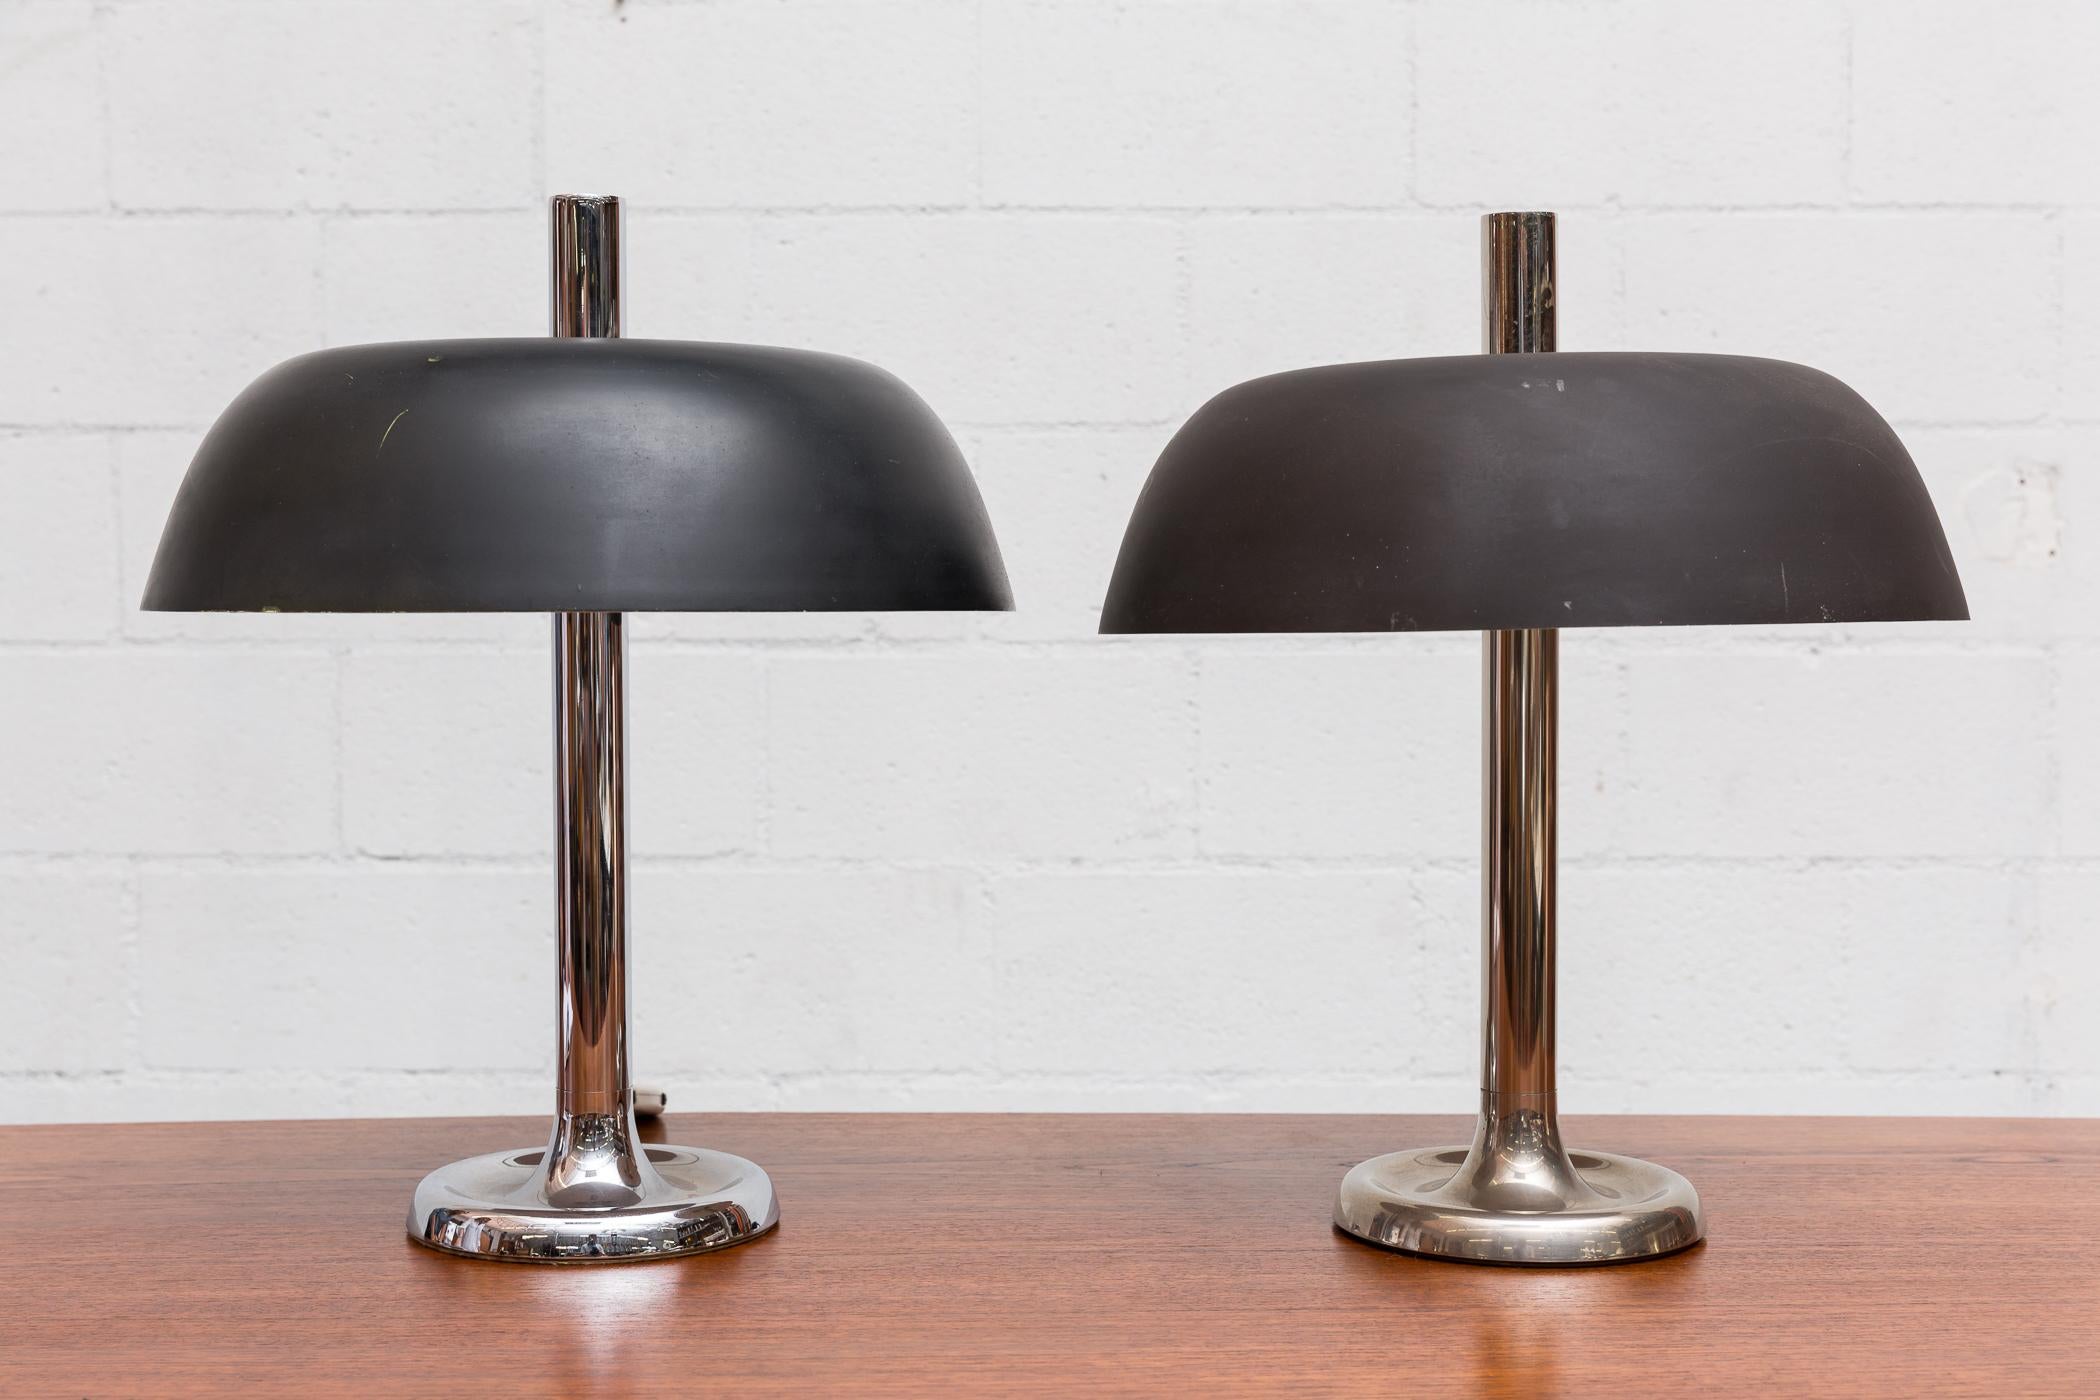 Midcentury desk lamp for Hillebrand, Germany. Matte black enameled metal shade.
Visible wear to chrome base and stem, consistent with age and usage. Two similar ones available, not a pair. Visible differences.